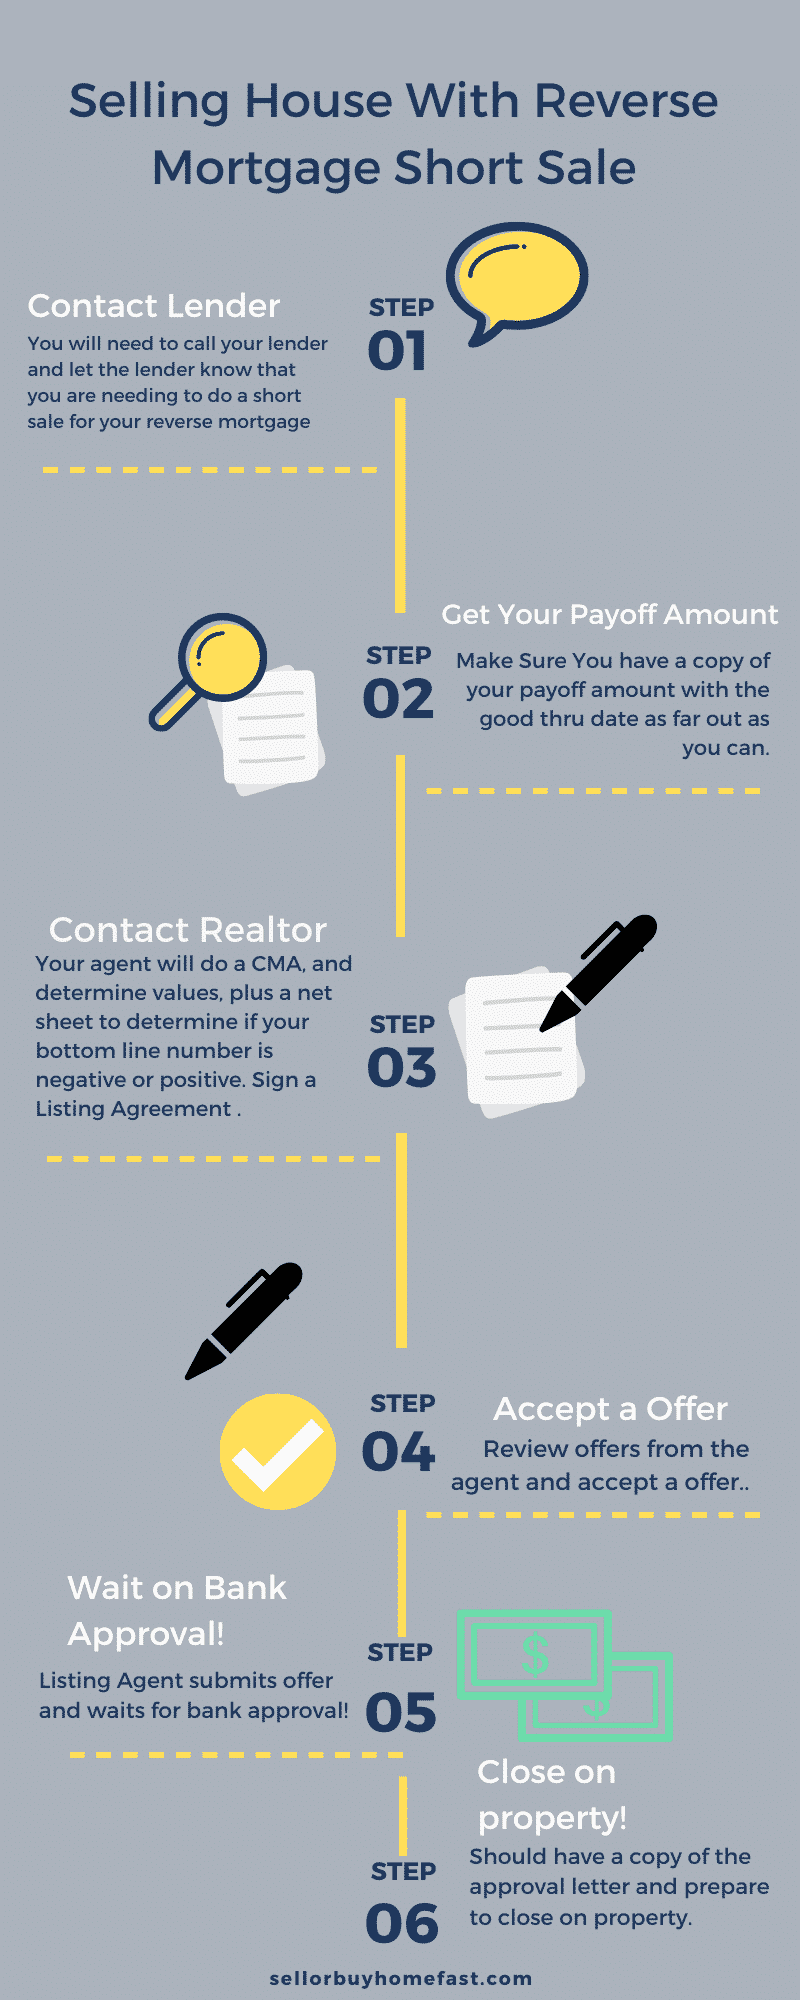 info graph of selling house with reverse mortgage